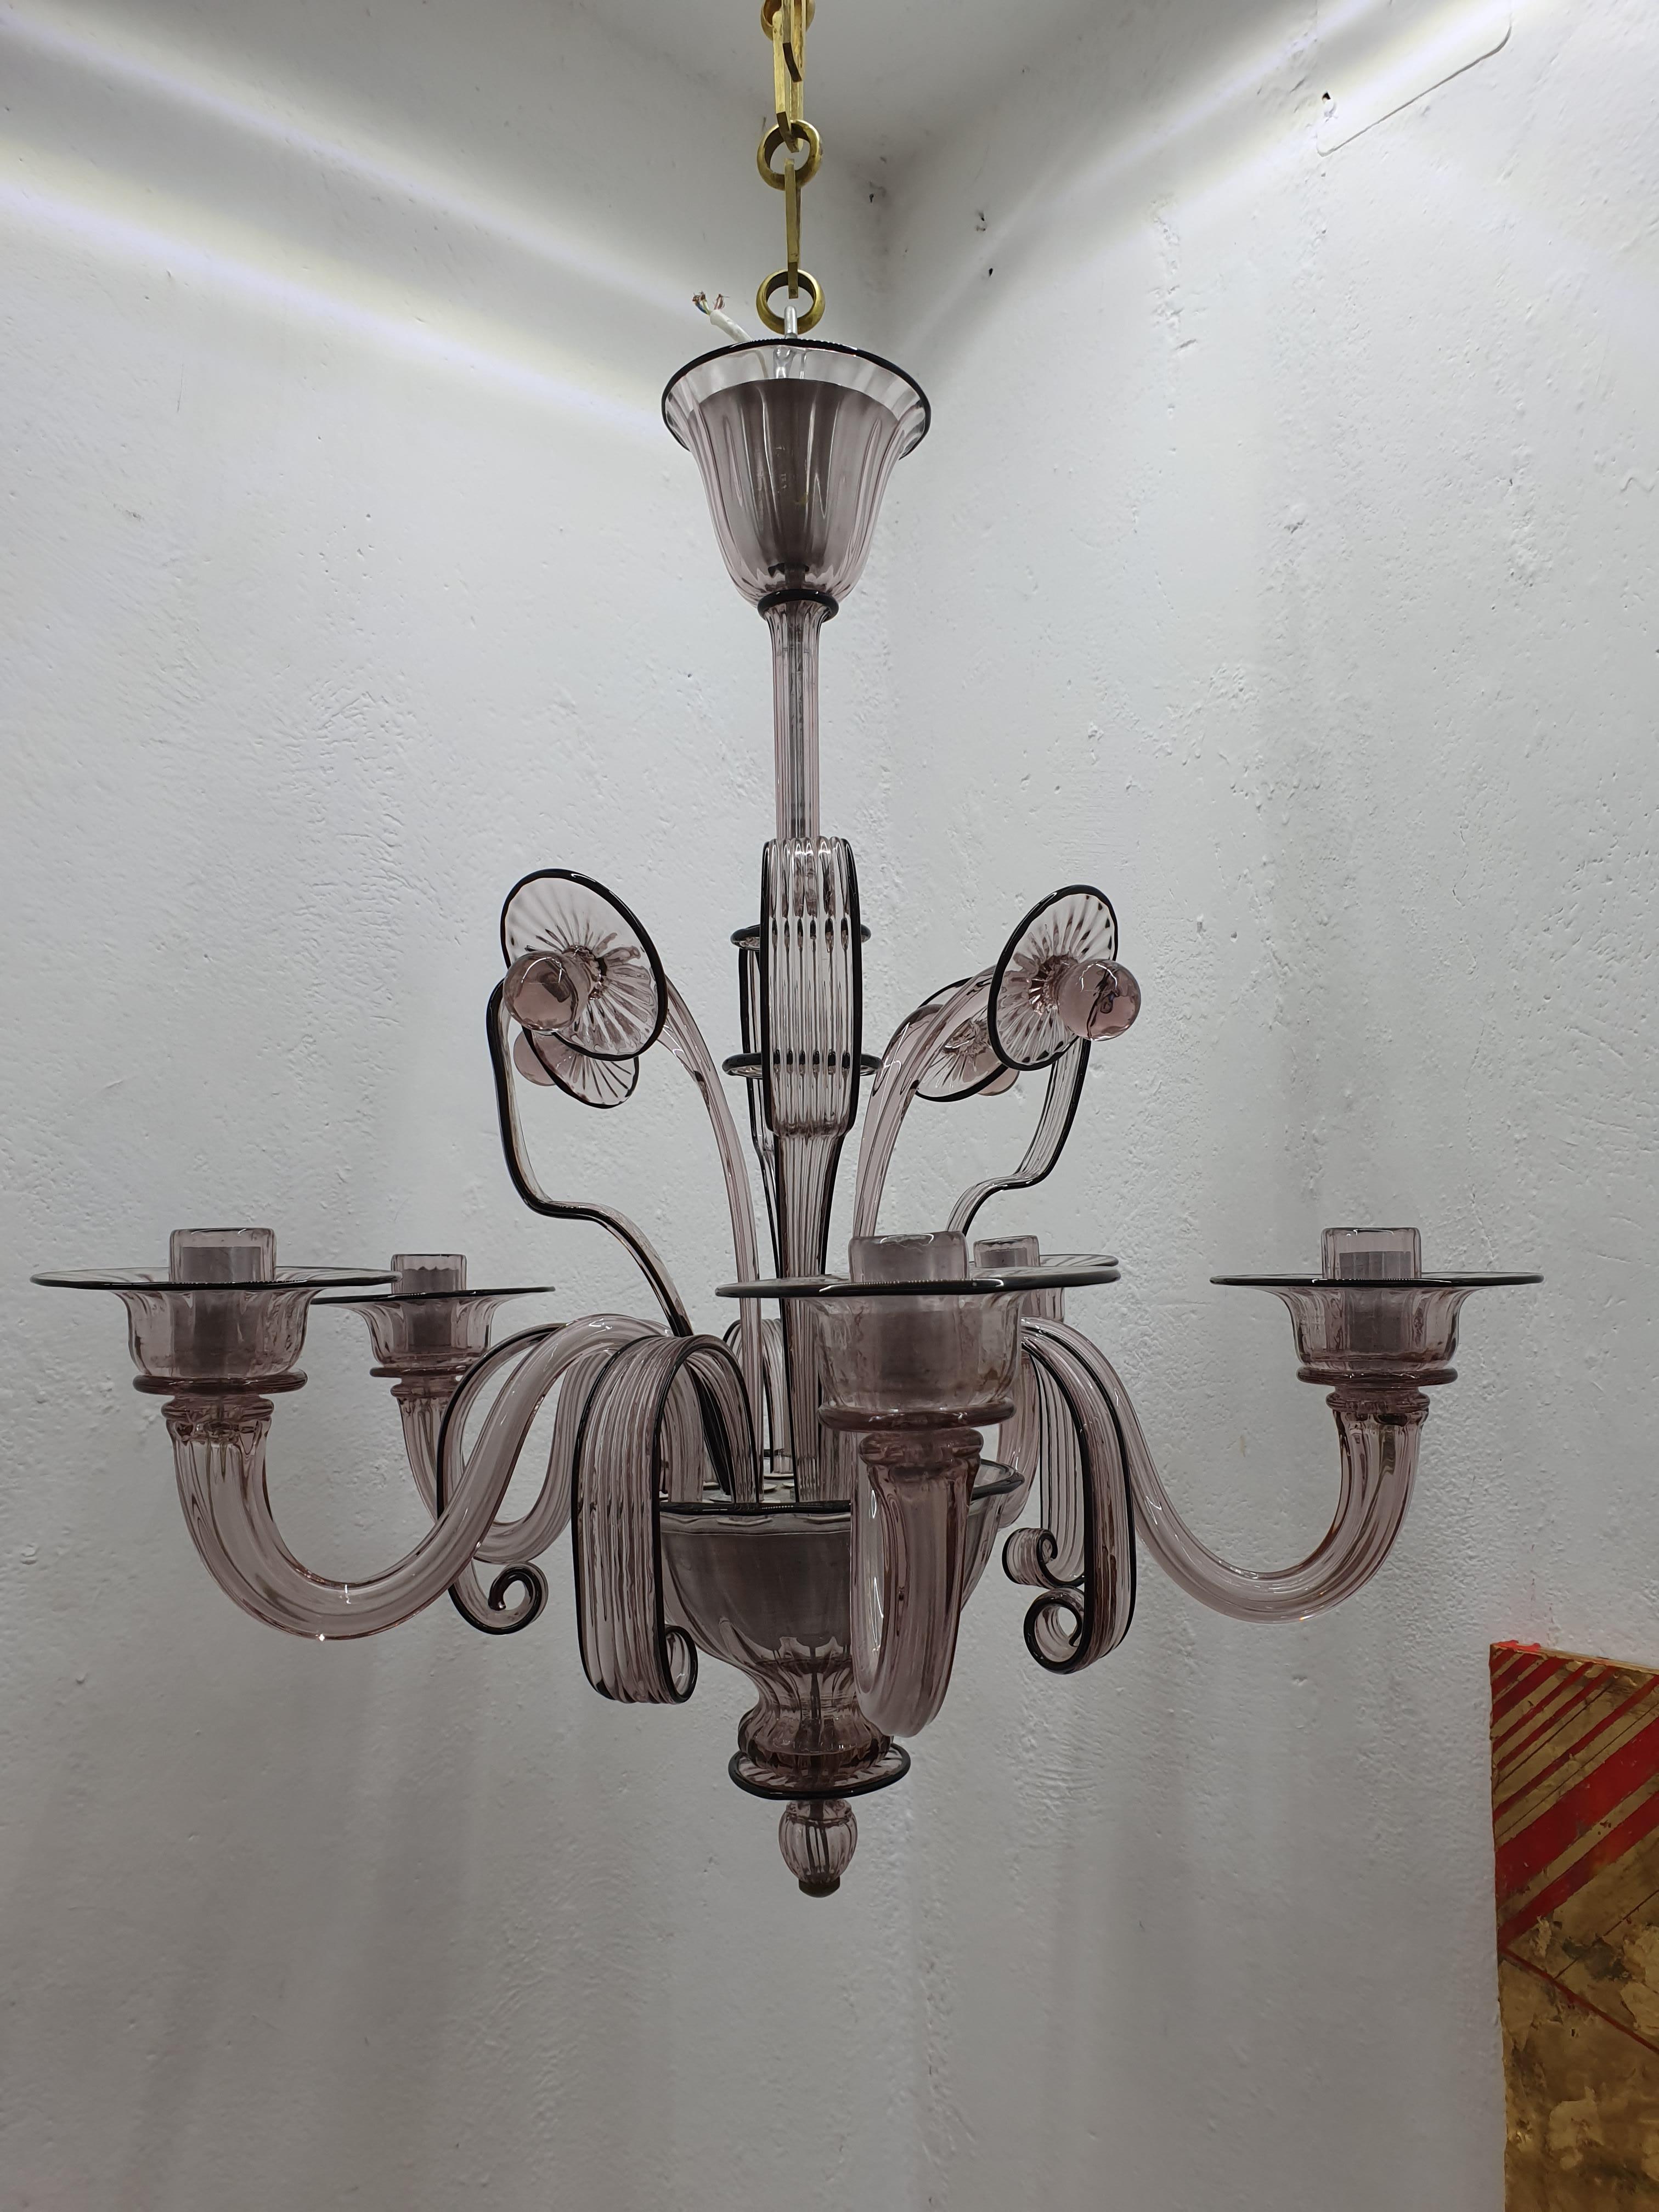 Art Deco Style Chandelier Attributed to Venini Murano Glass, Itlay, circa 1940 For Sale 5